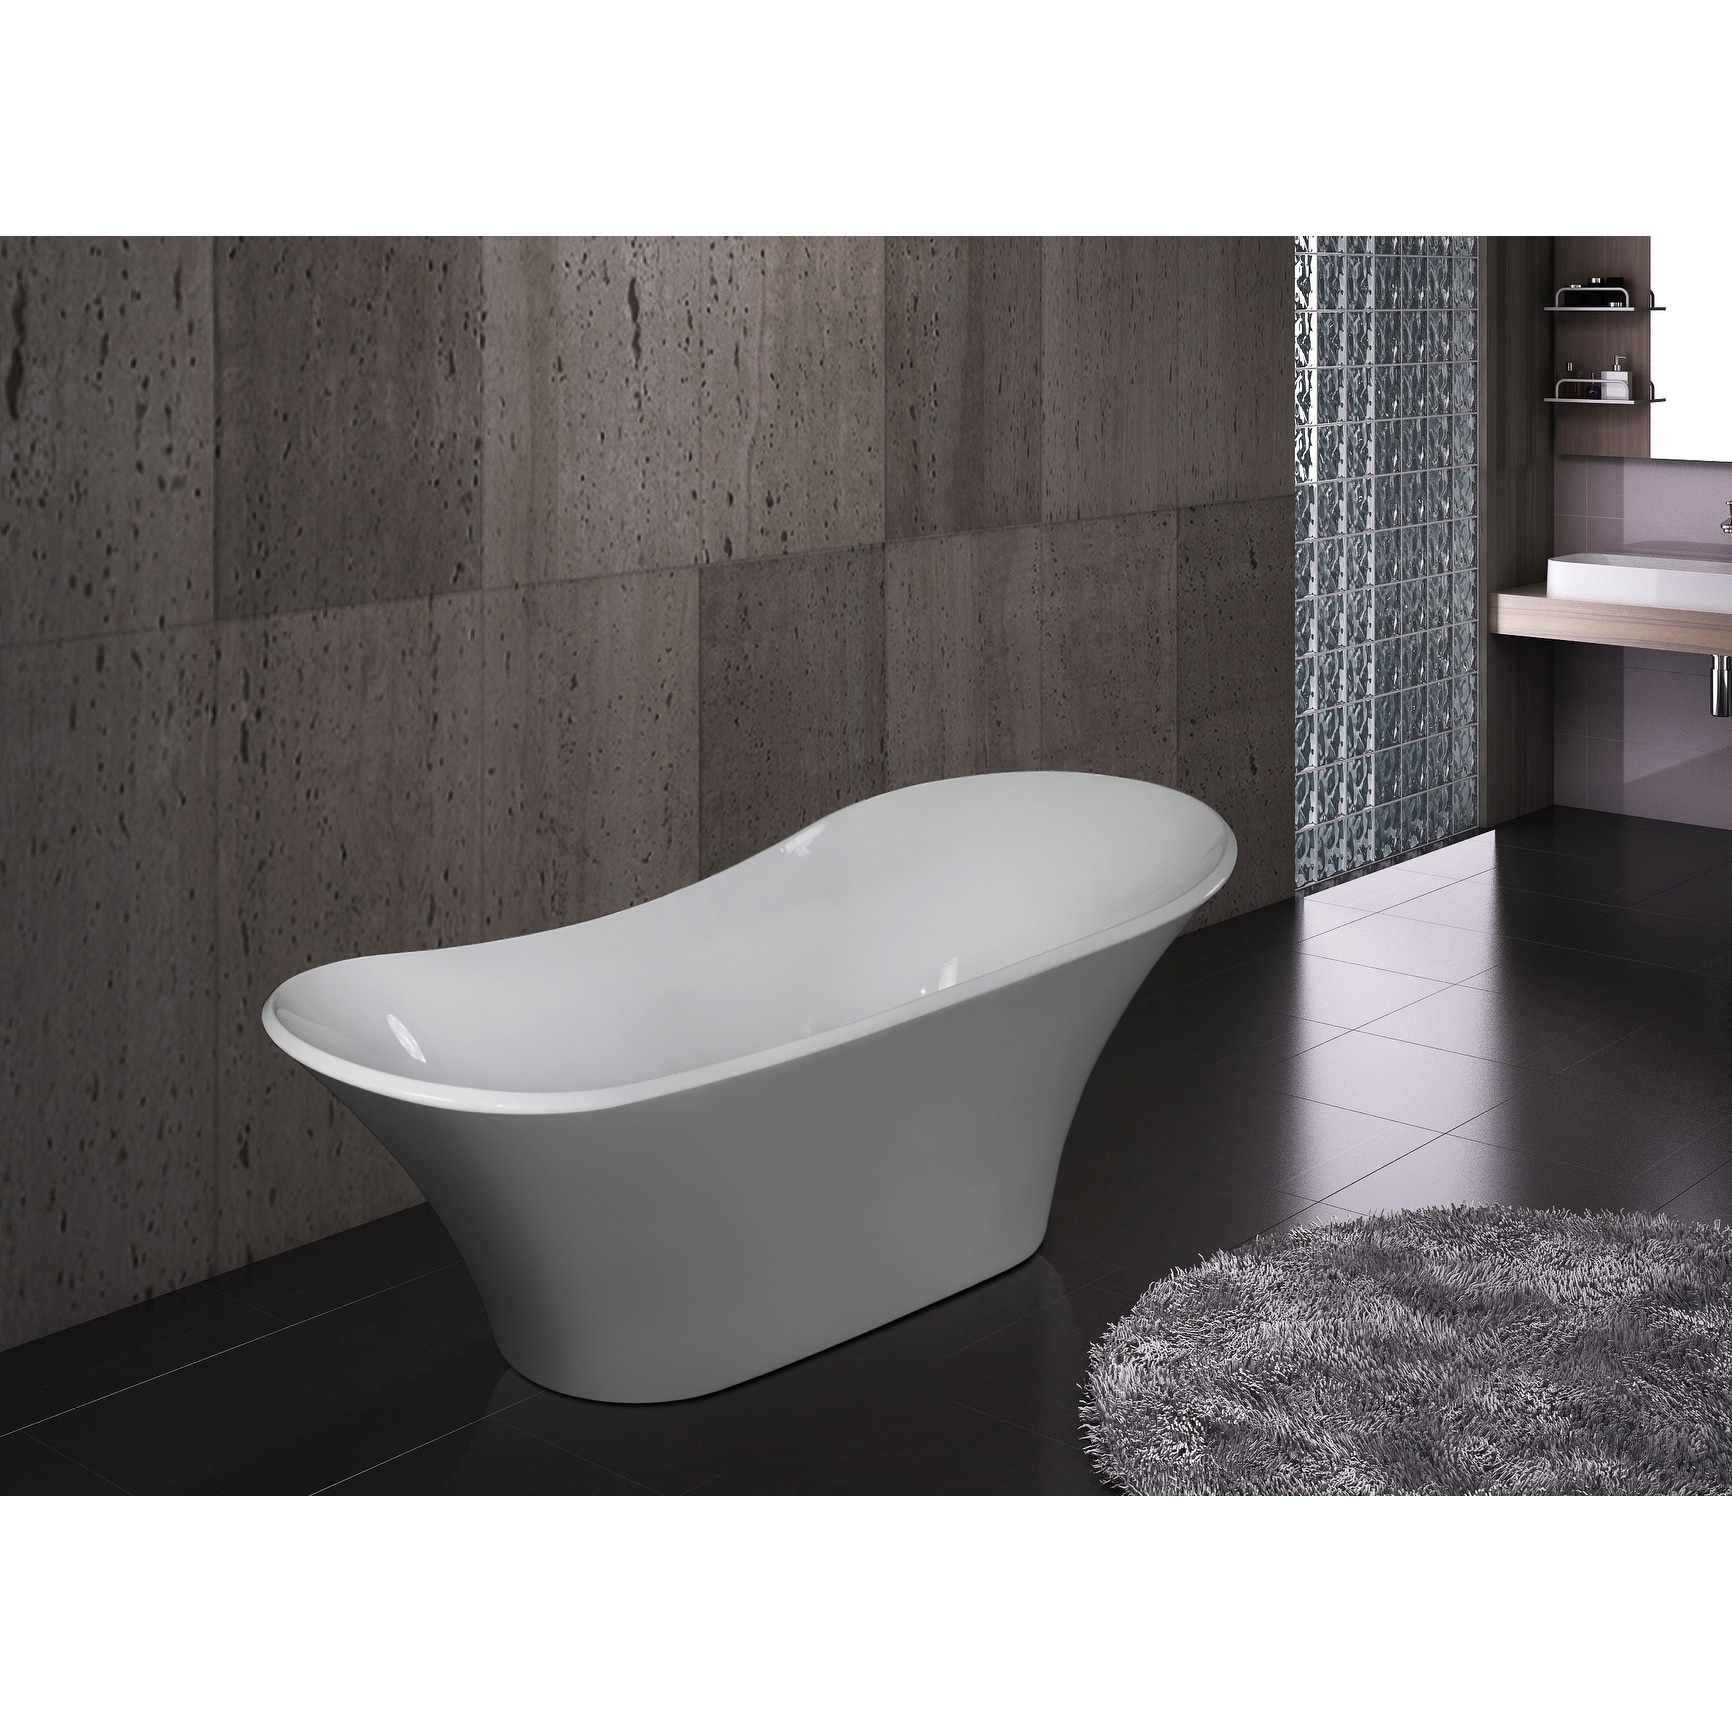 15 Incredible Freestanding Tubs With Showers Freestanding Tub